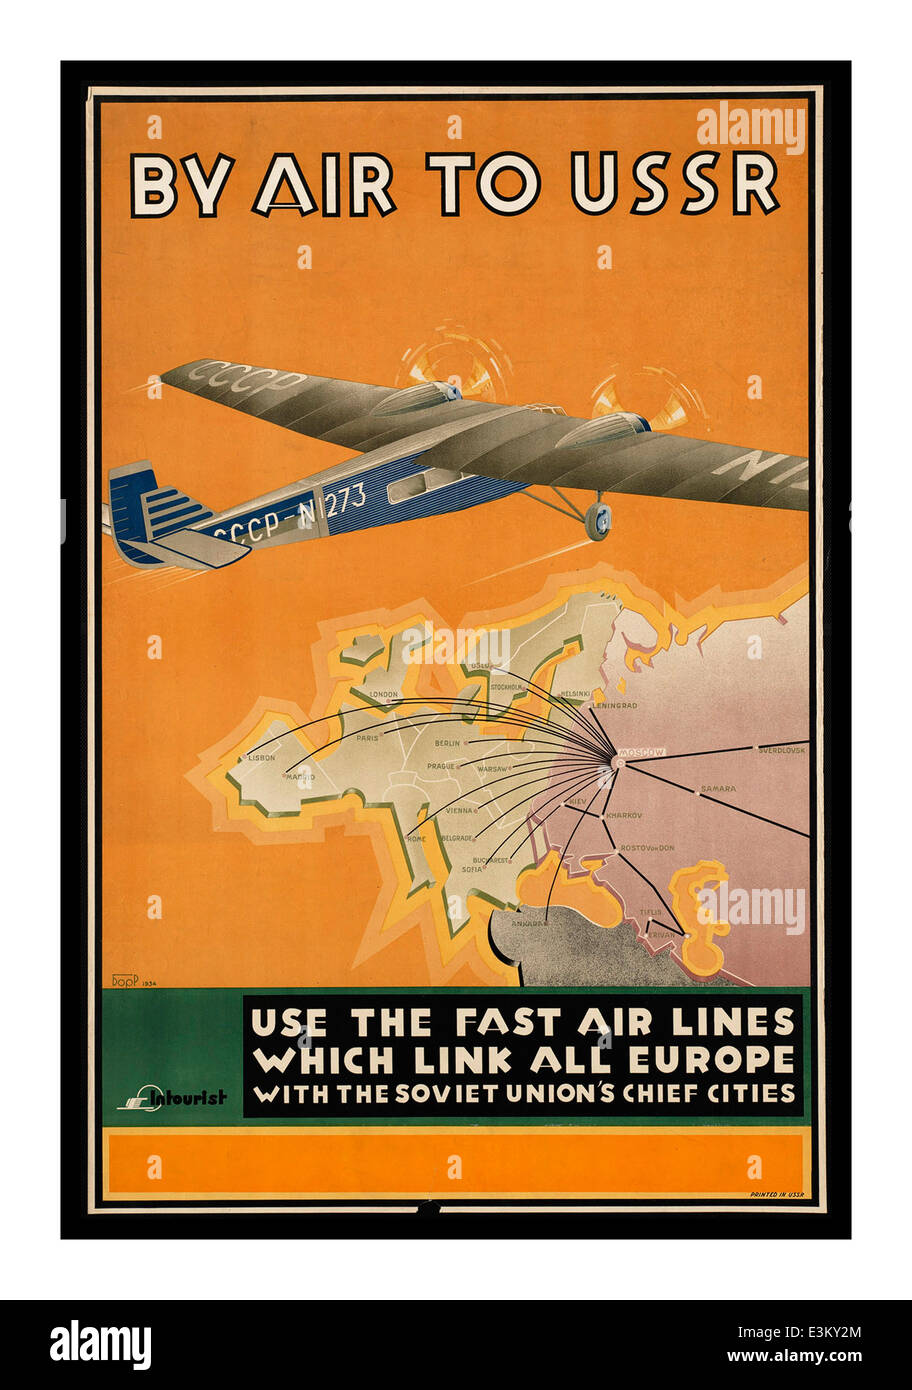 Vintage travel poster 1930's for air travel to the former USSR Stock Photo